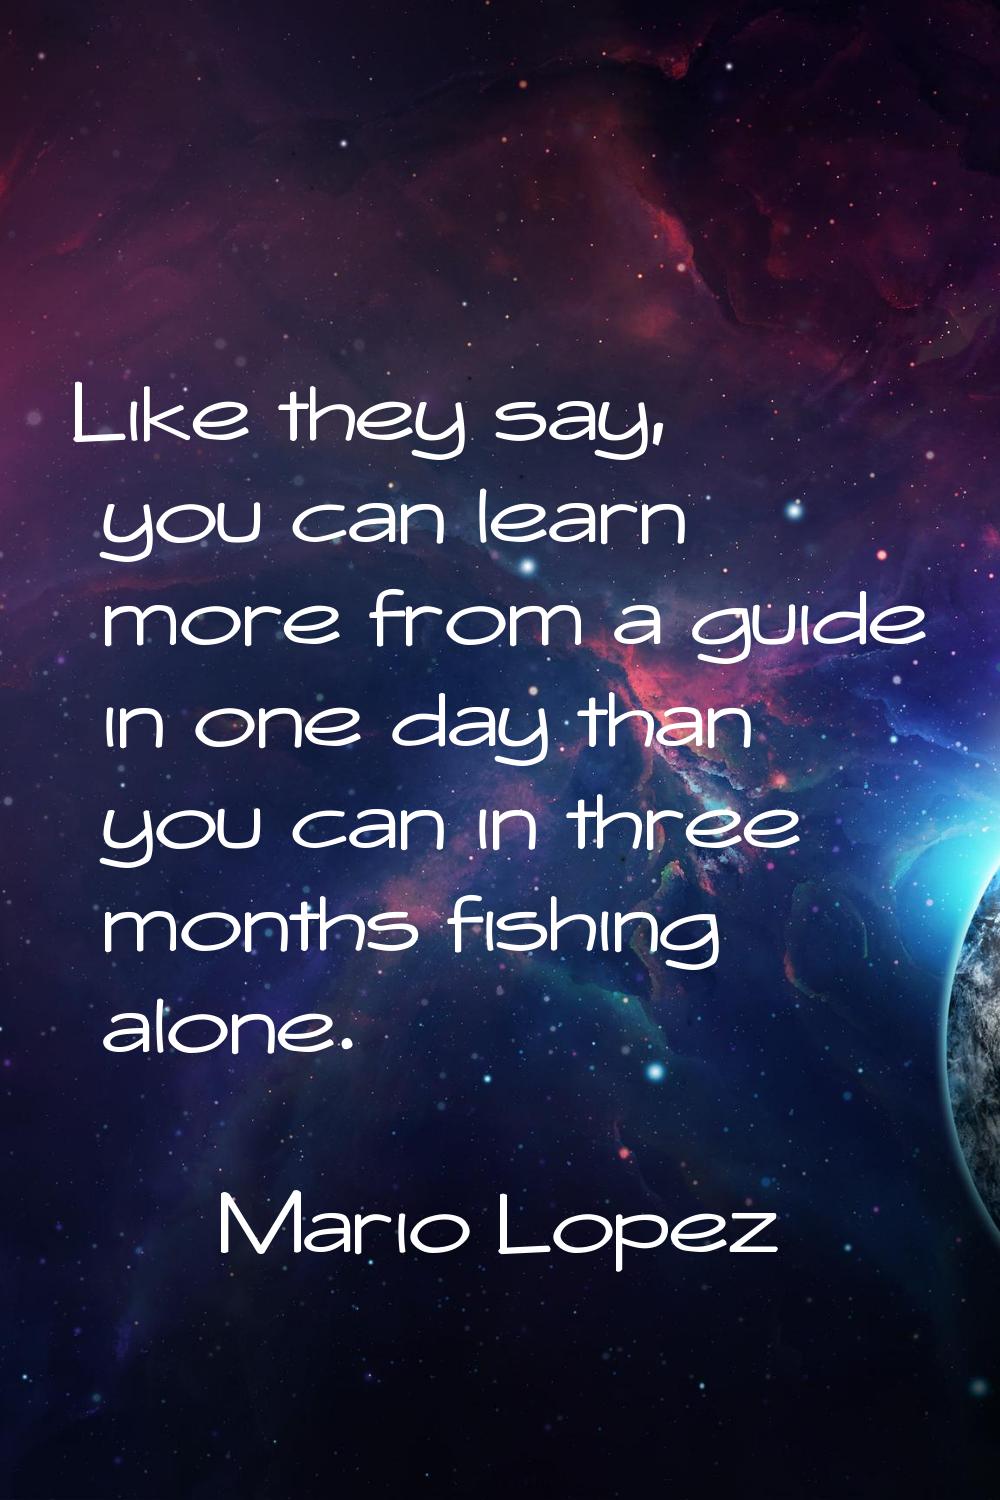 Like they say, you can learn more from a guide in one day than you can in three months fishing alon